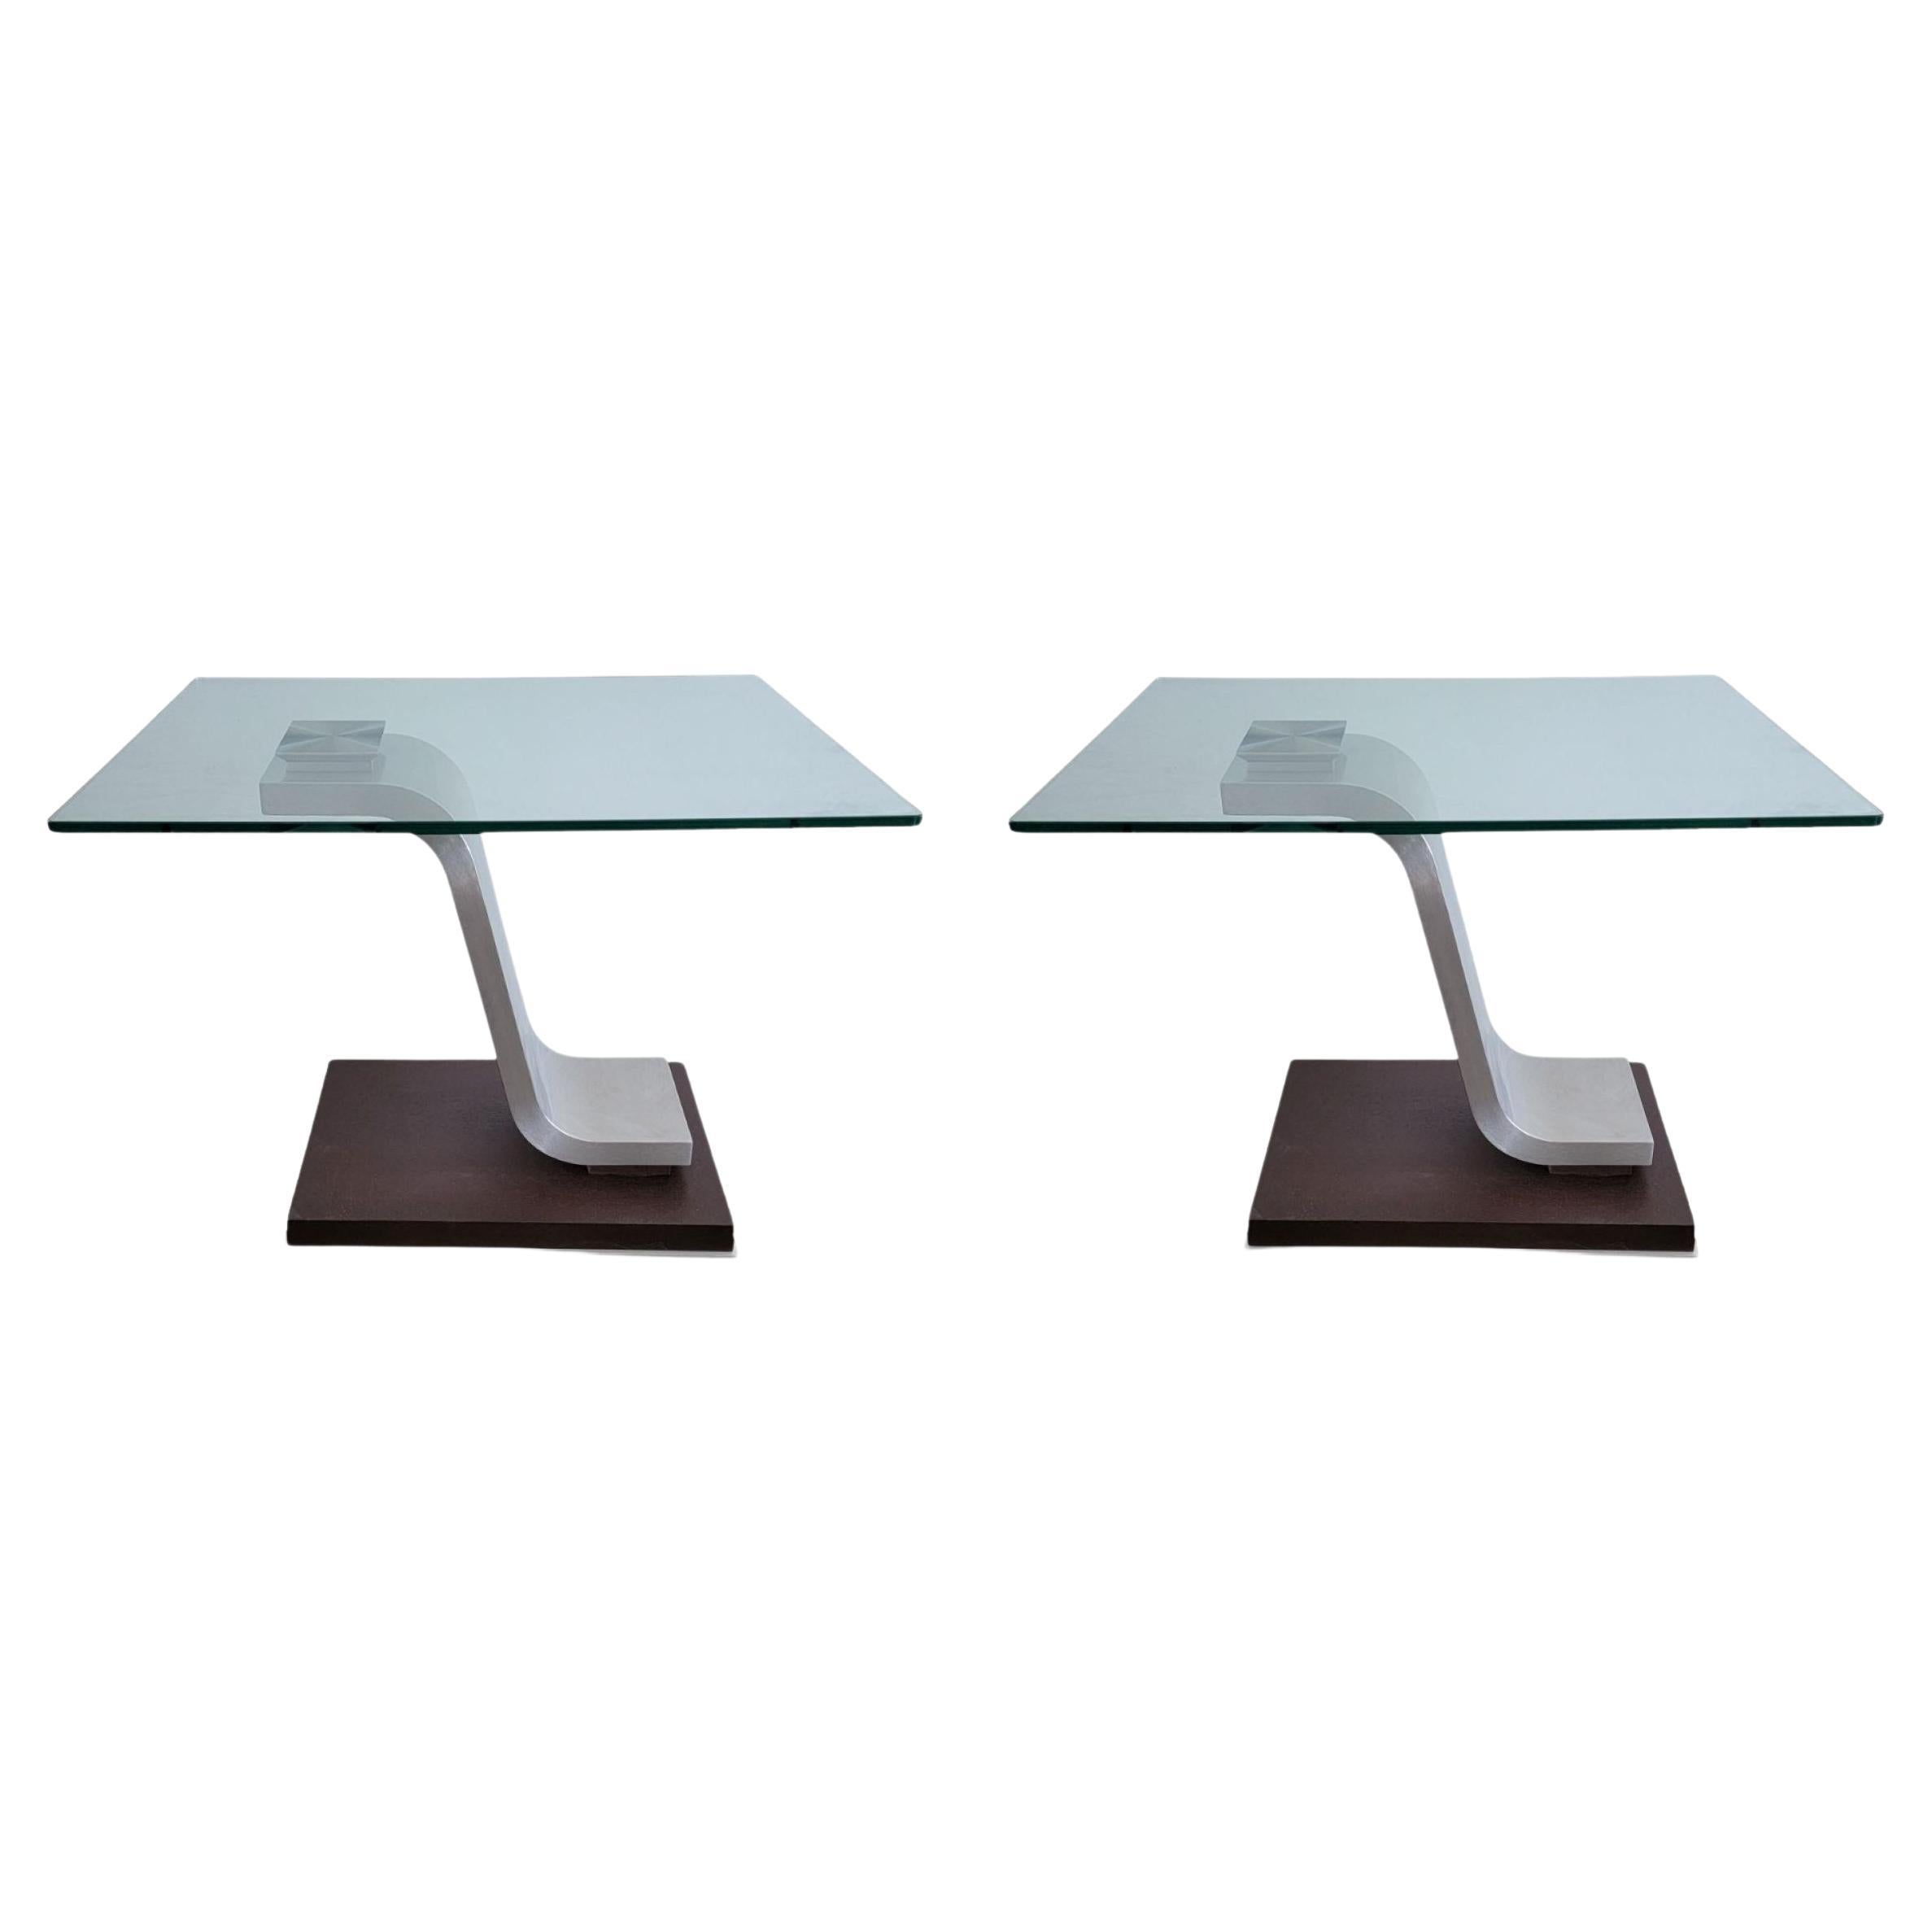 1980 Vintage Chrome and Wooden Chrome Side Tables, a Pair